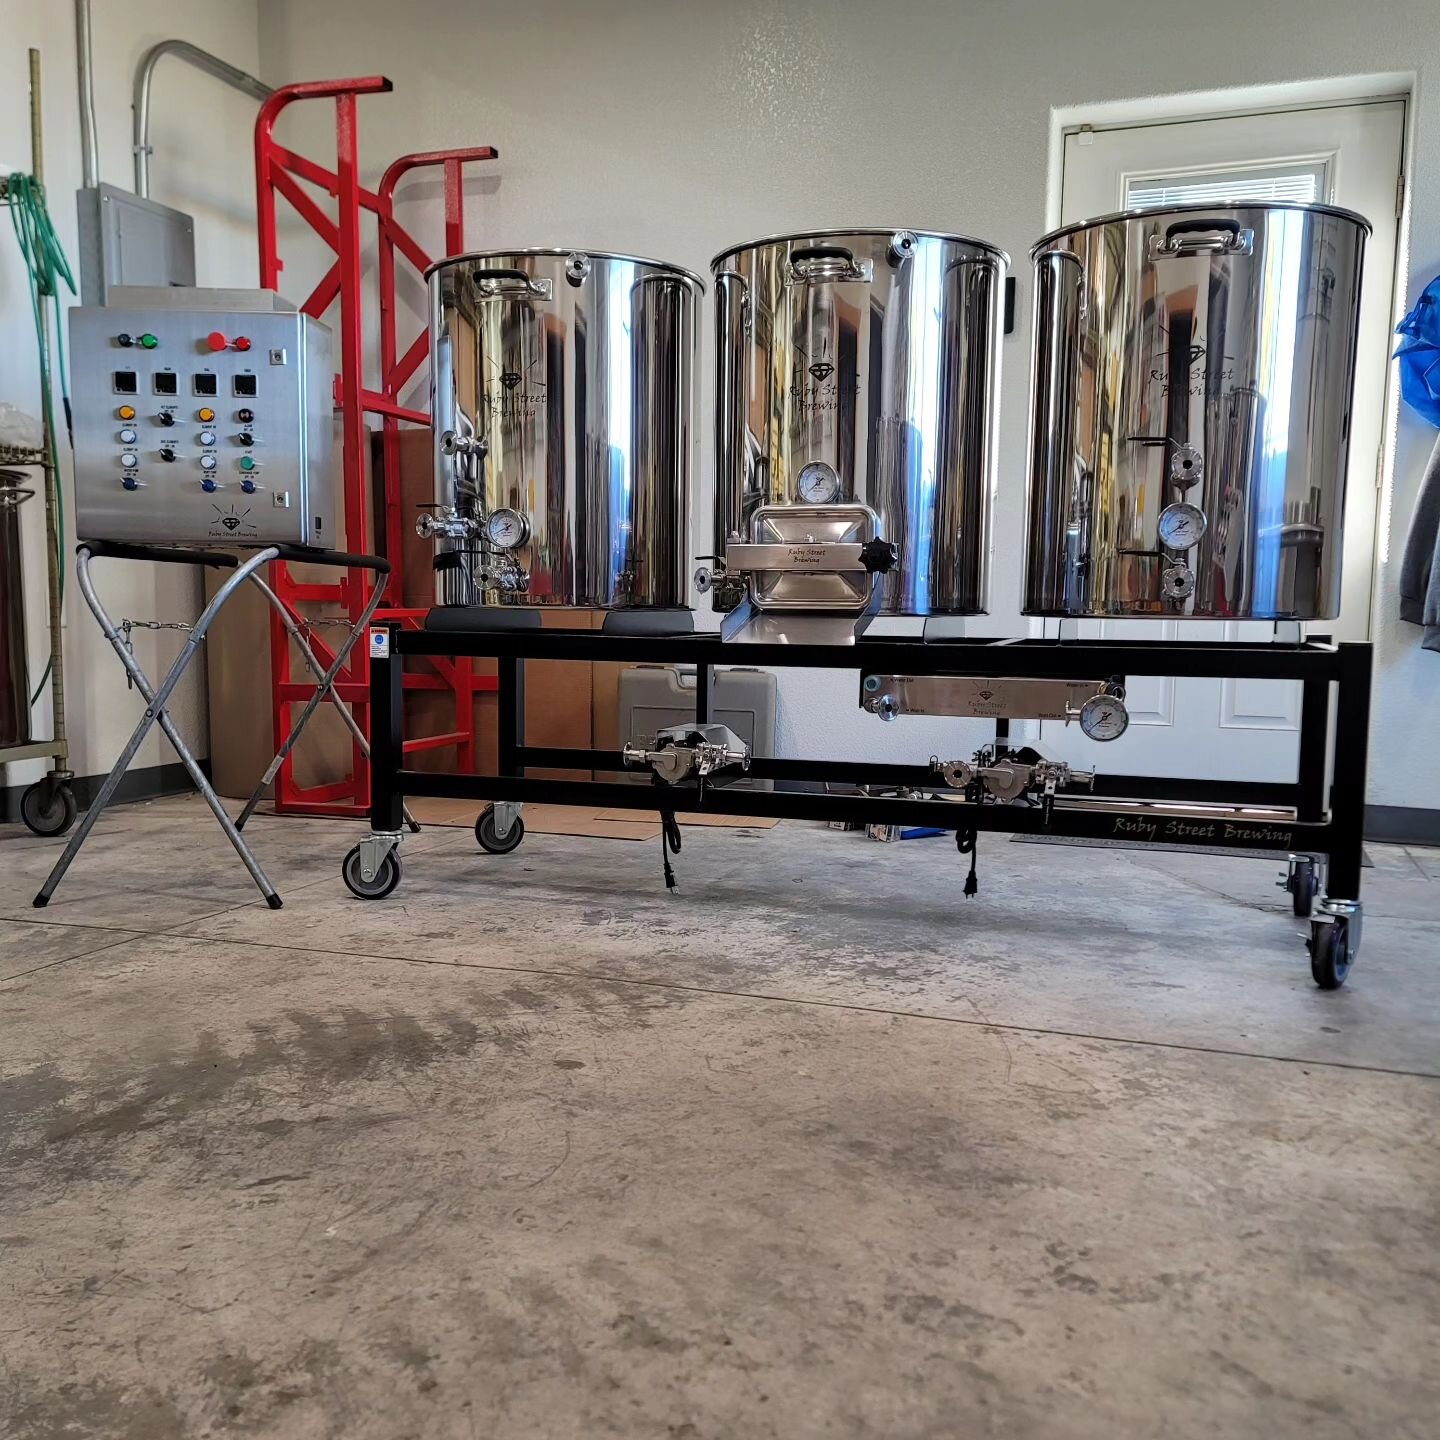 Just finished up this ONYX 1 BBL electric brewing system.  This is the HERMS version with a 100 amp double batching control panel.  The ONYX systems are very competitively priced 1 BBL brewhouses with awesome standard features like grain out manway, 